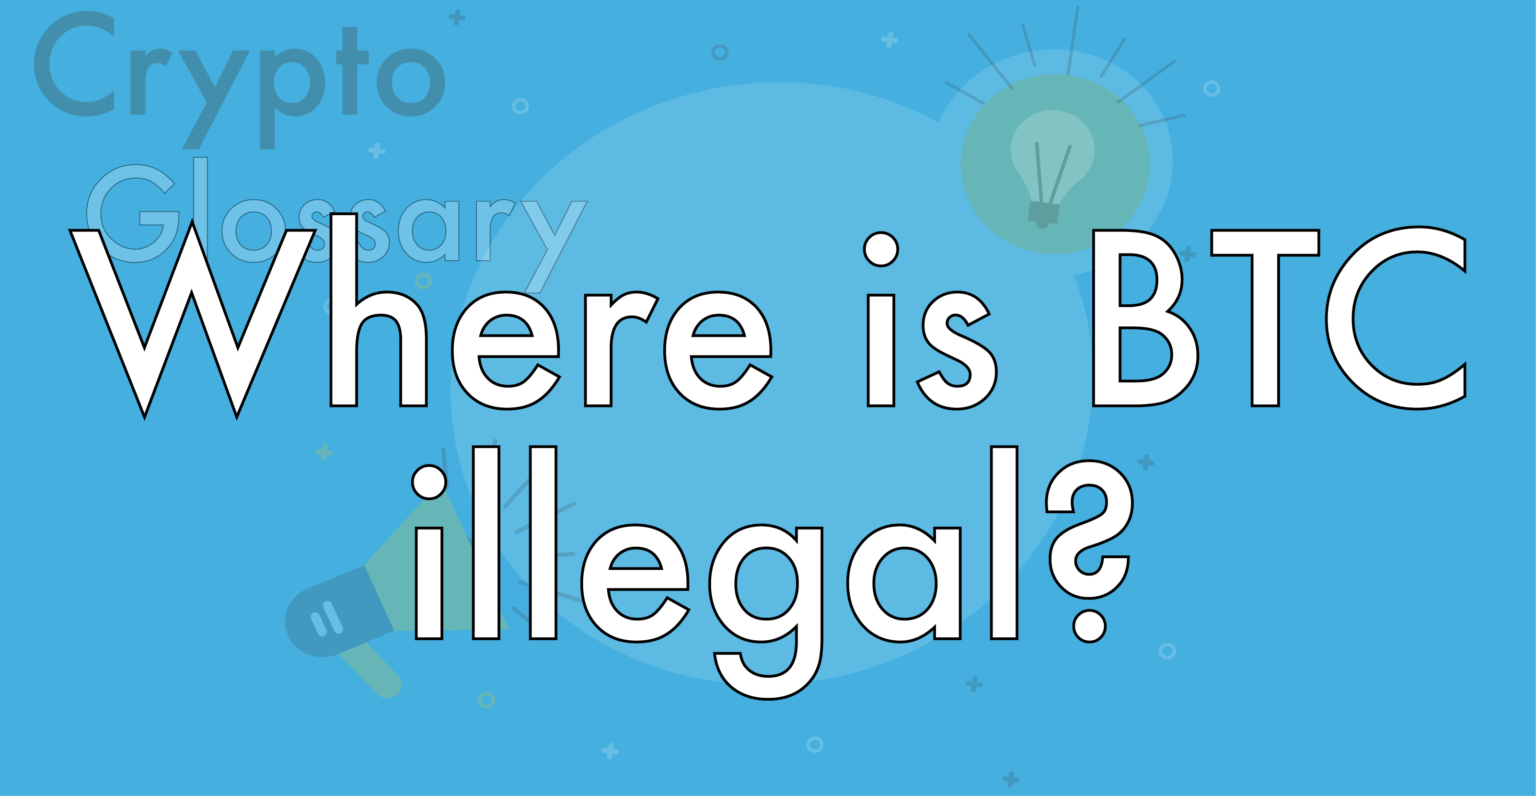 buy bitcoin legal or illegal